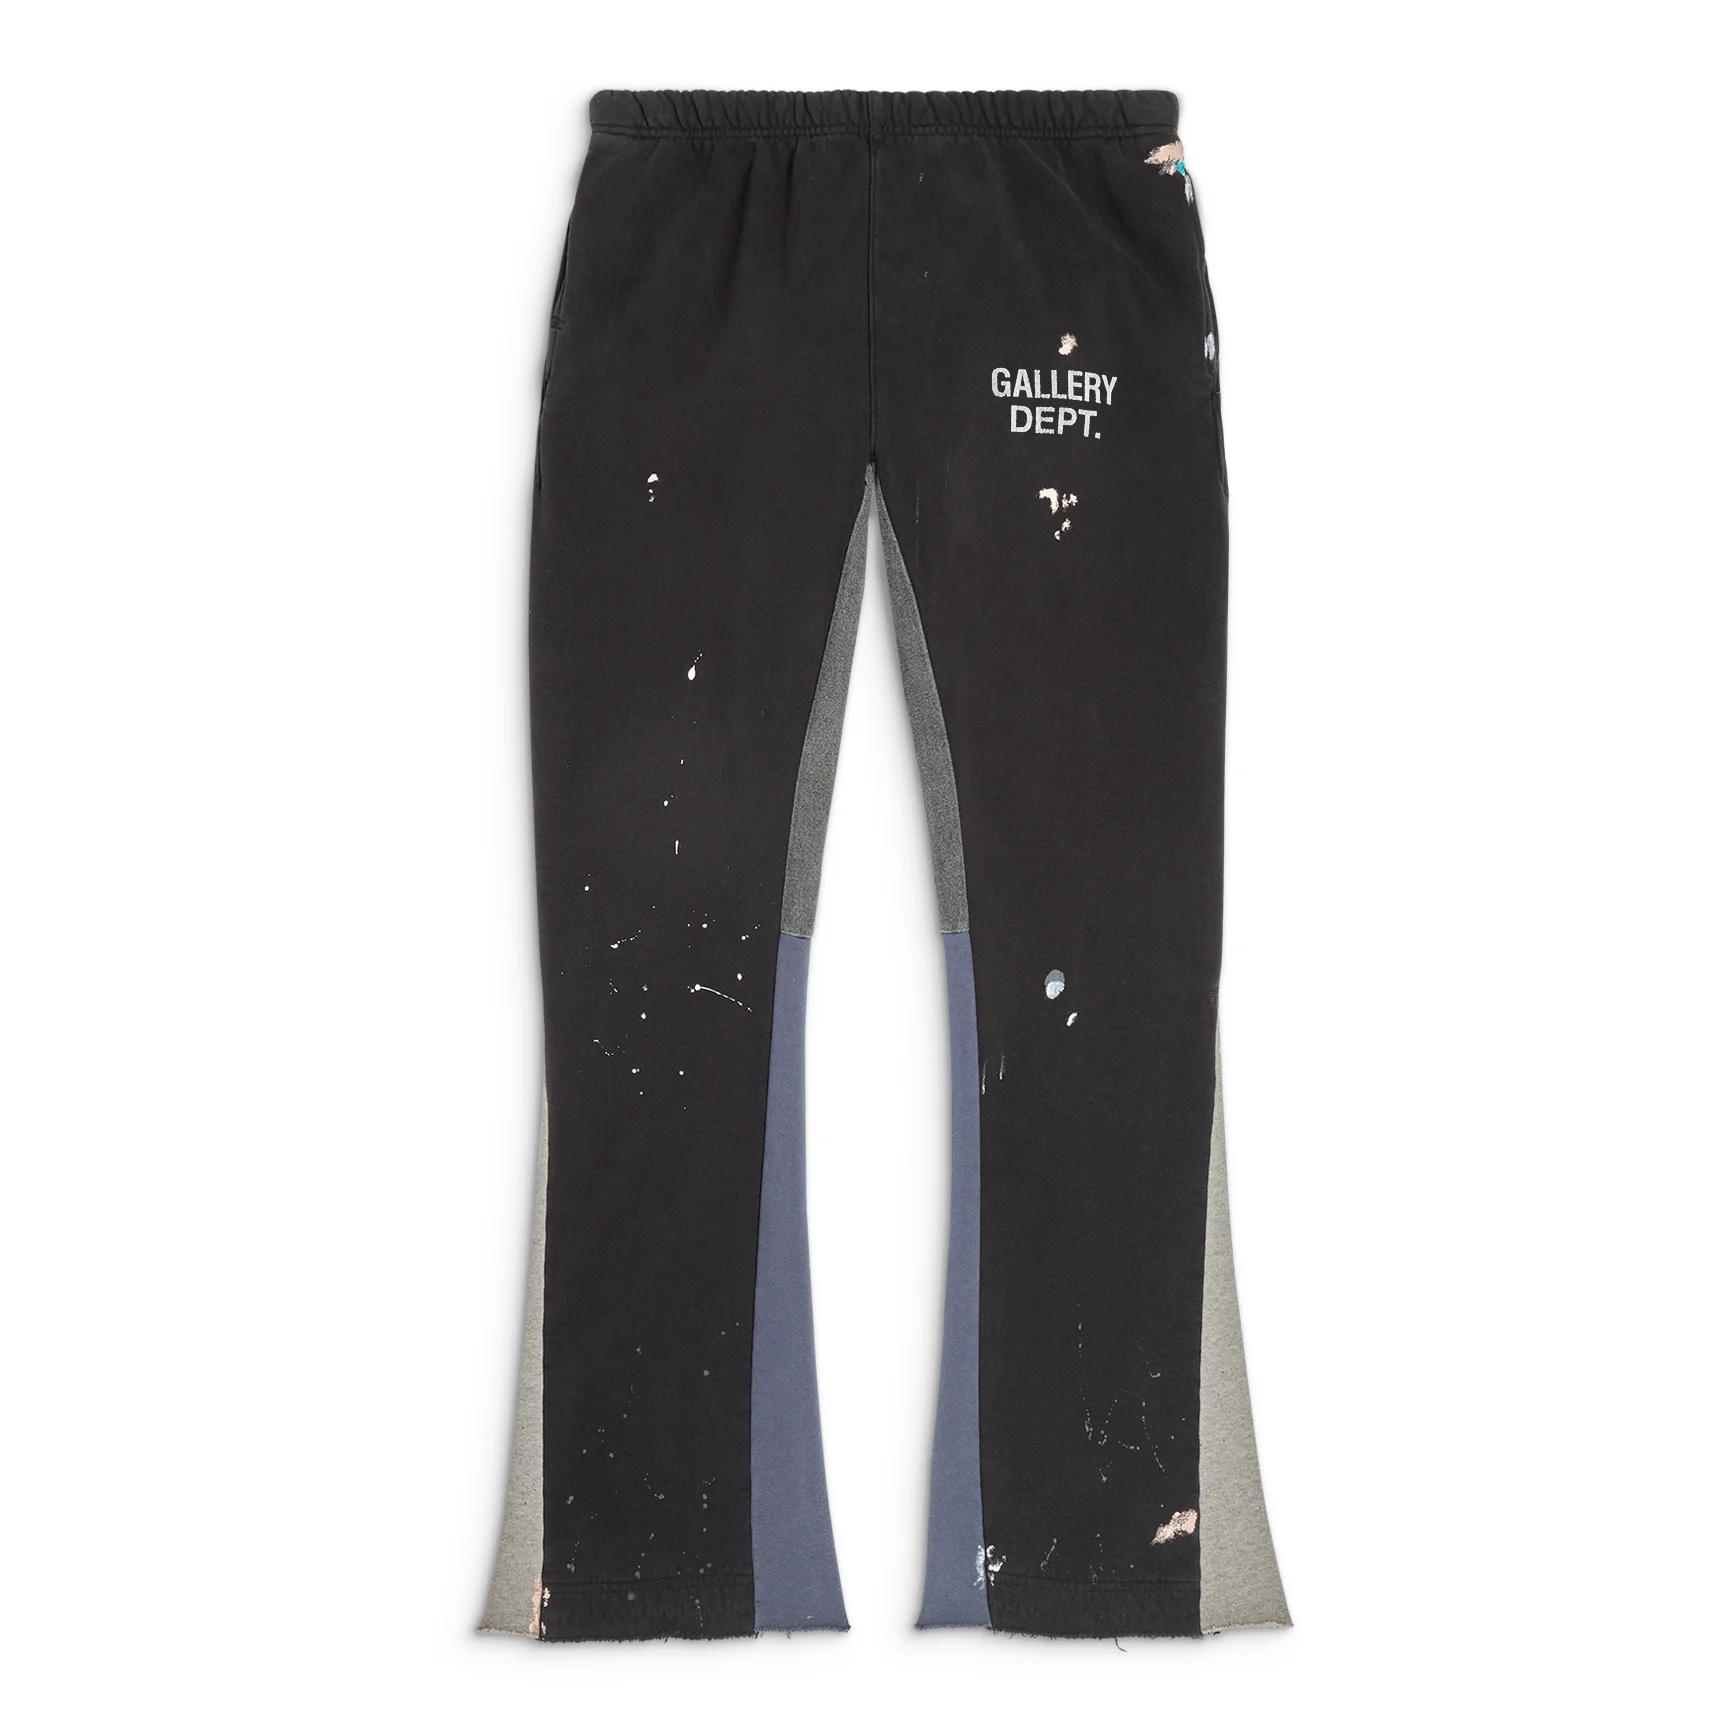 Gallery Dept's Painted Flare Sweatpants